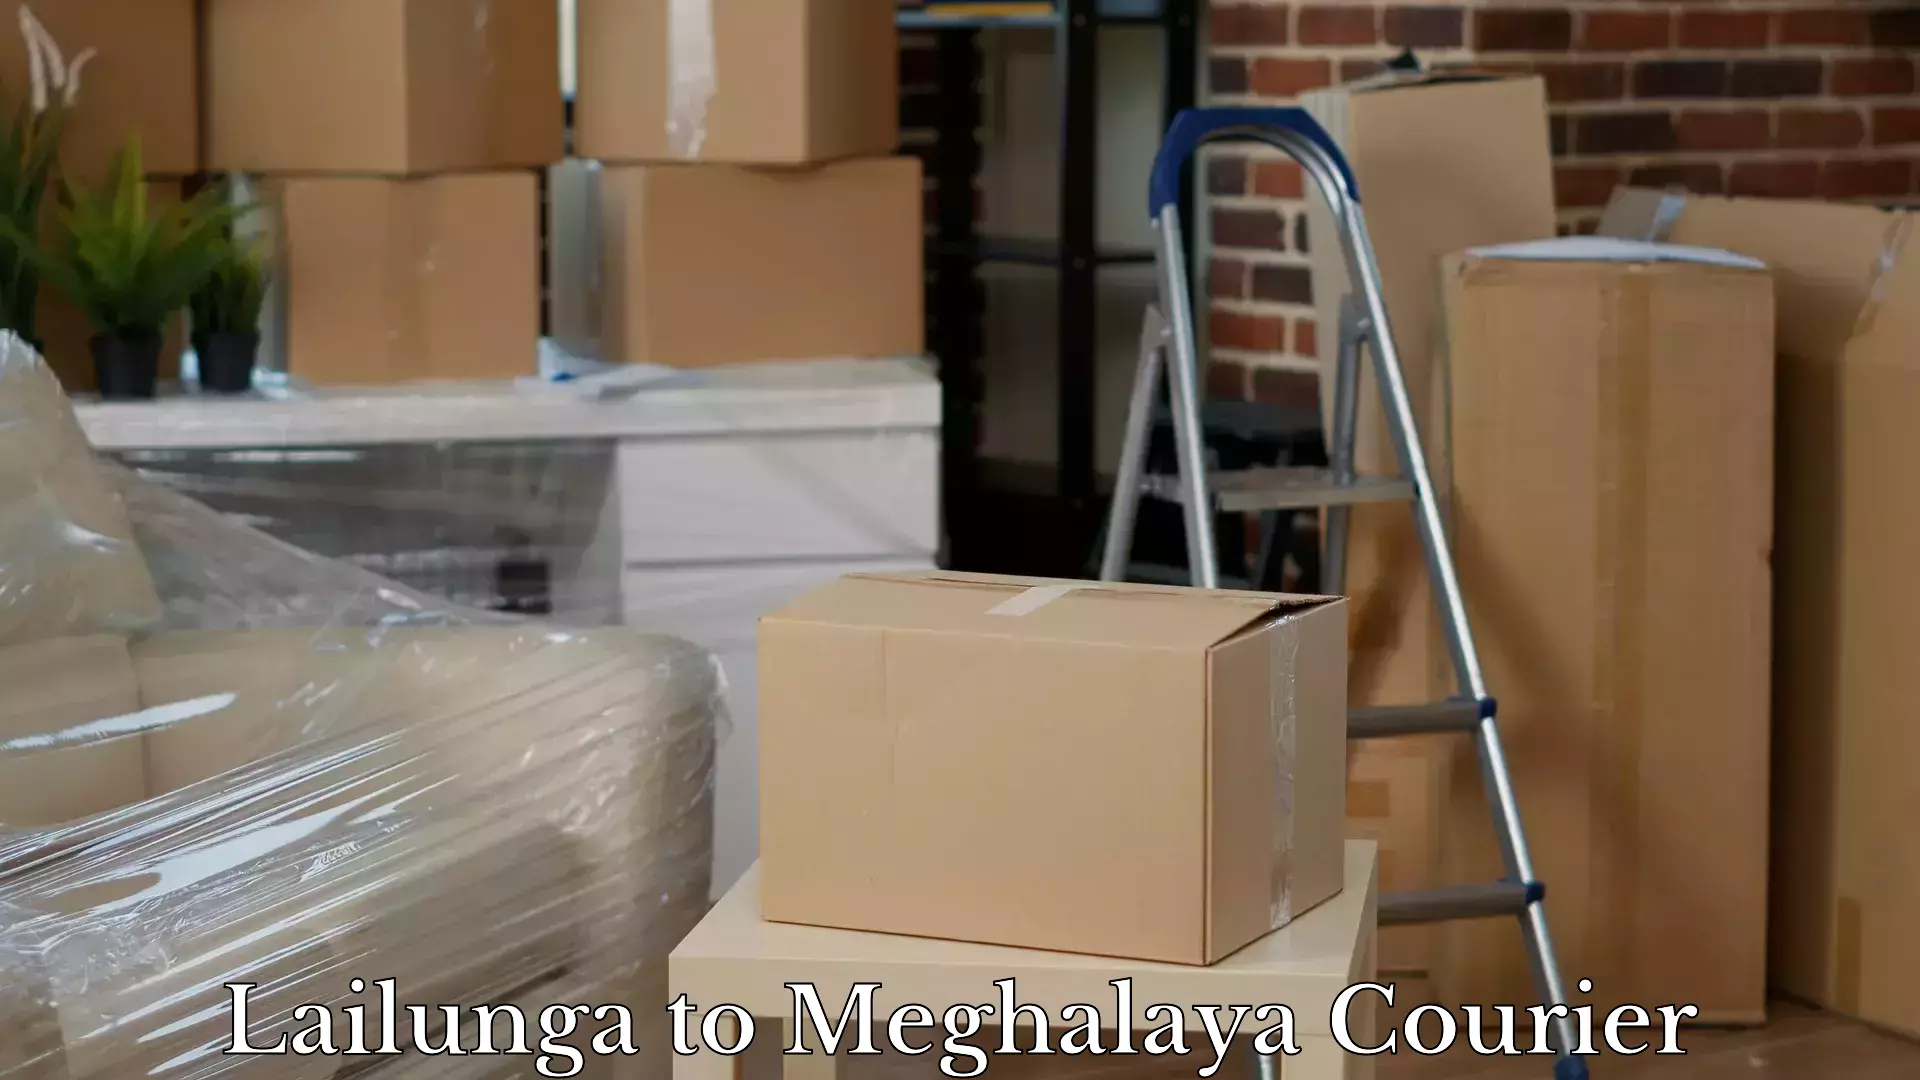 Luggage delivery logistics in Lailunga to Meghalaya